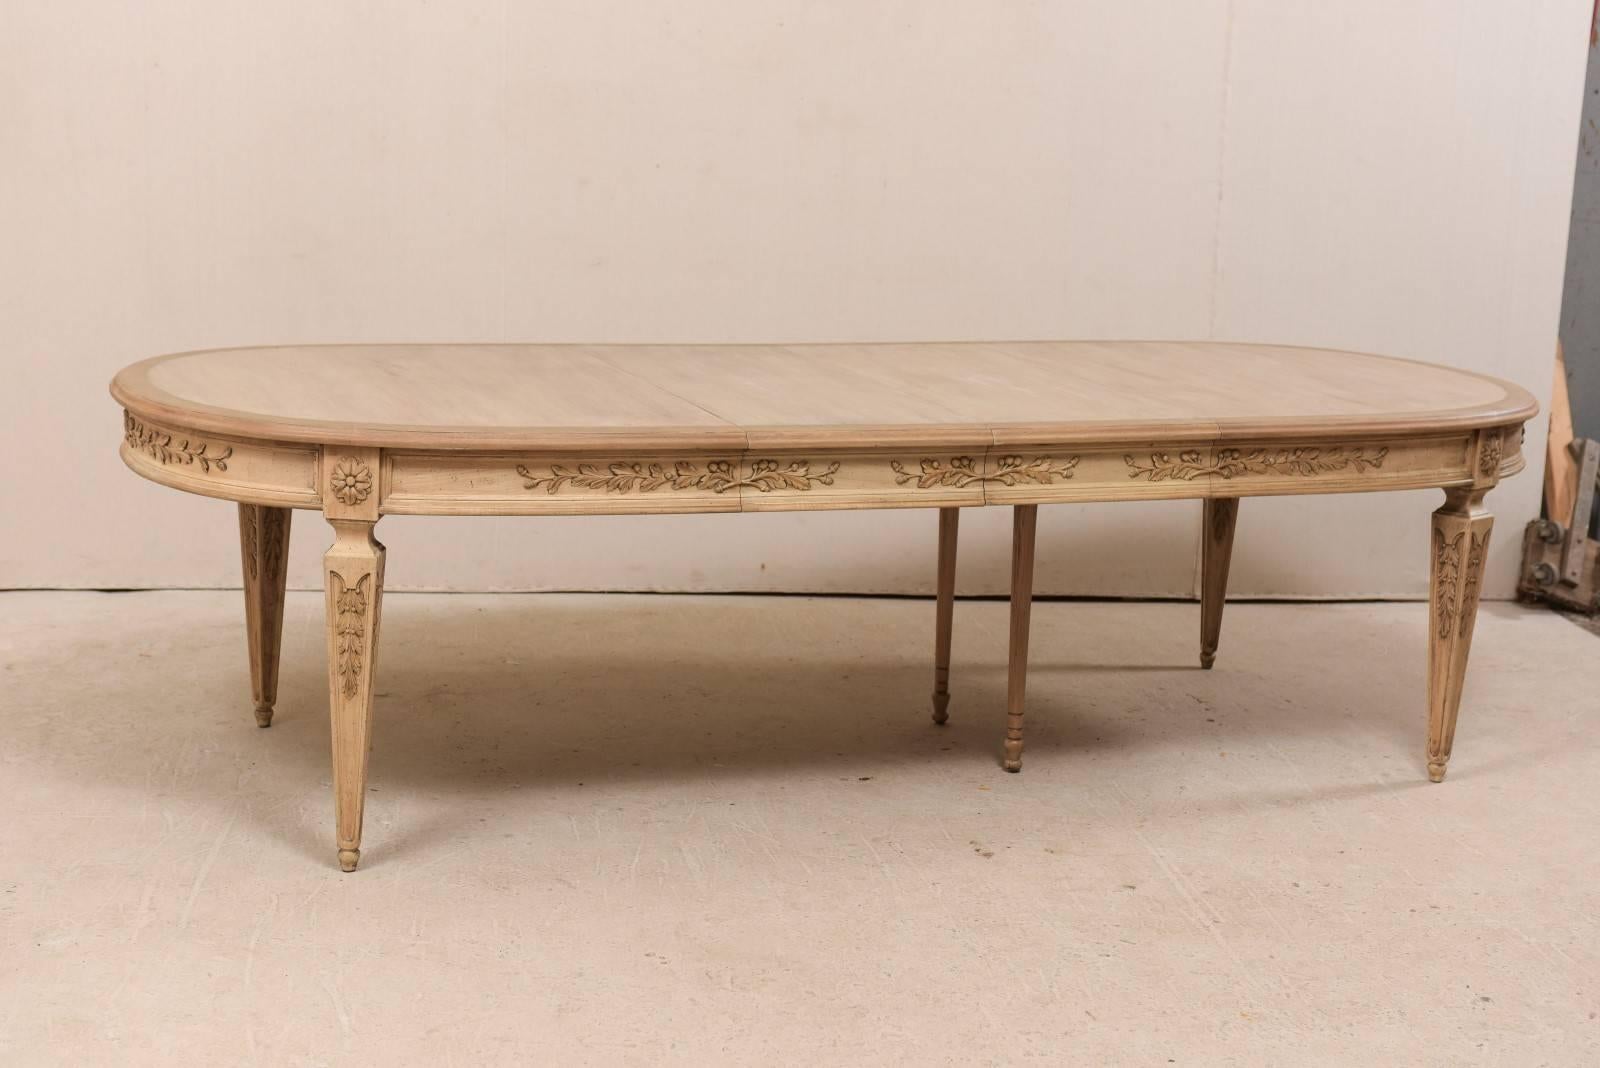 A vintage American dining table with beautifully carved apron and legs. This ash wood dining-room table features an oval-shaped top with ornately carved foliage motif about all sides of the rounded apron, and carved flowers at each knee. This